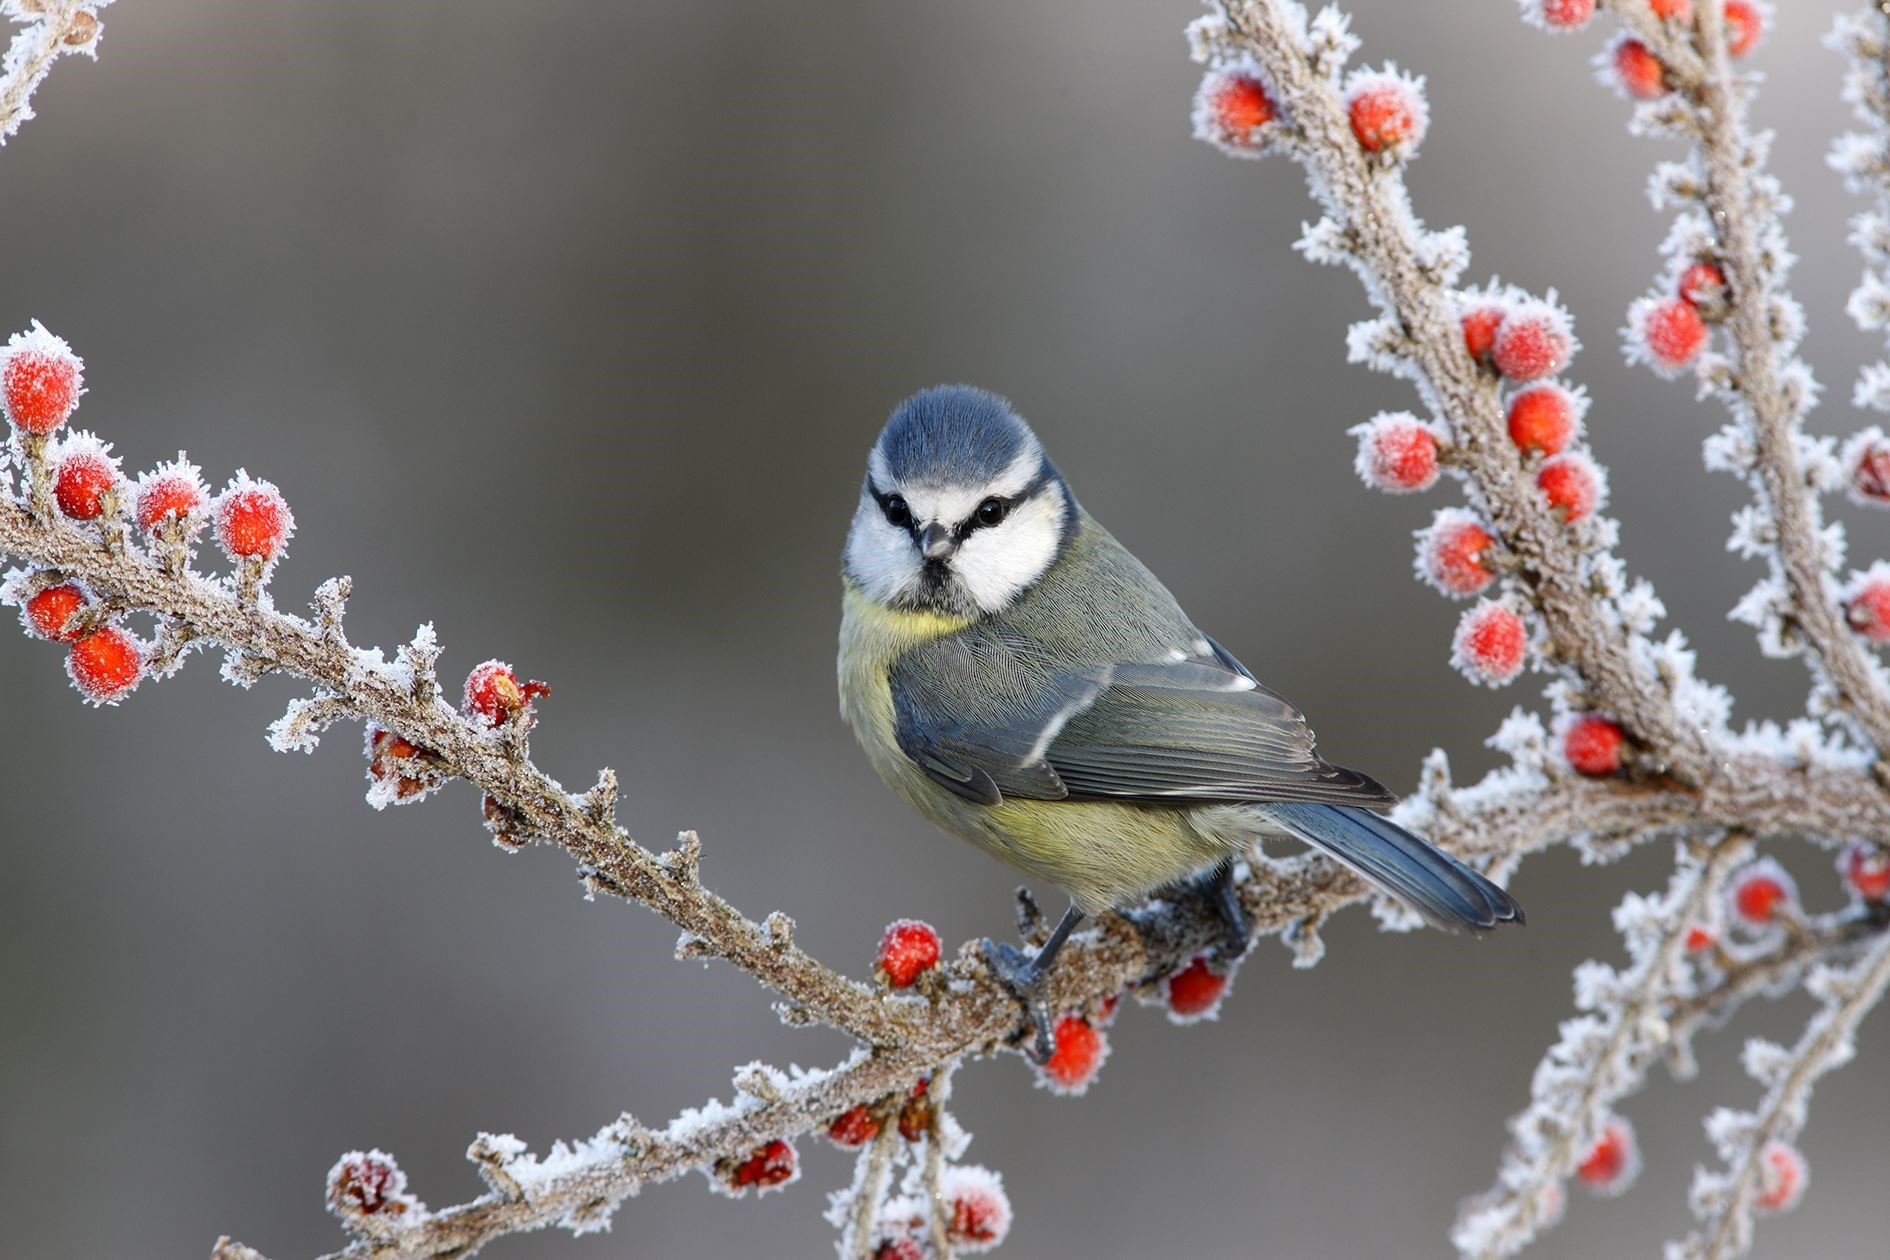 A blue tit amid frosty scenes. Stock image.